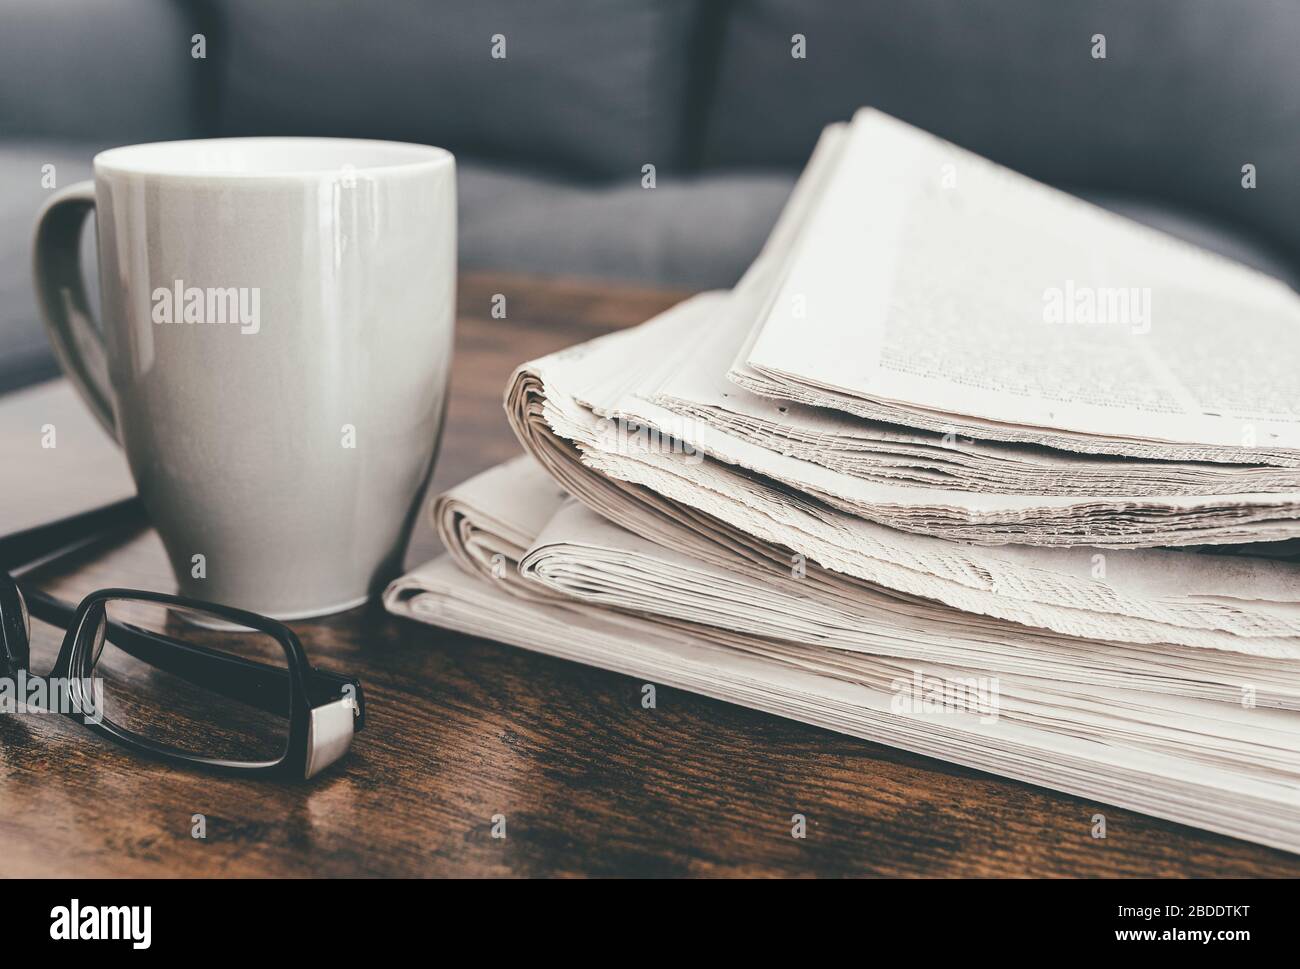 close-up shot of stack of newspapers, coffee mug and glasses on living room table Stock Photo